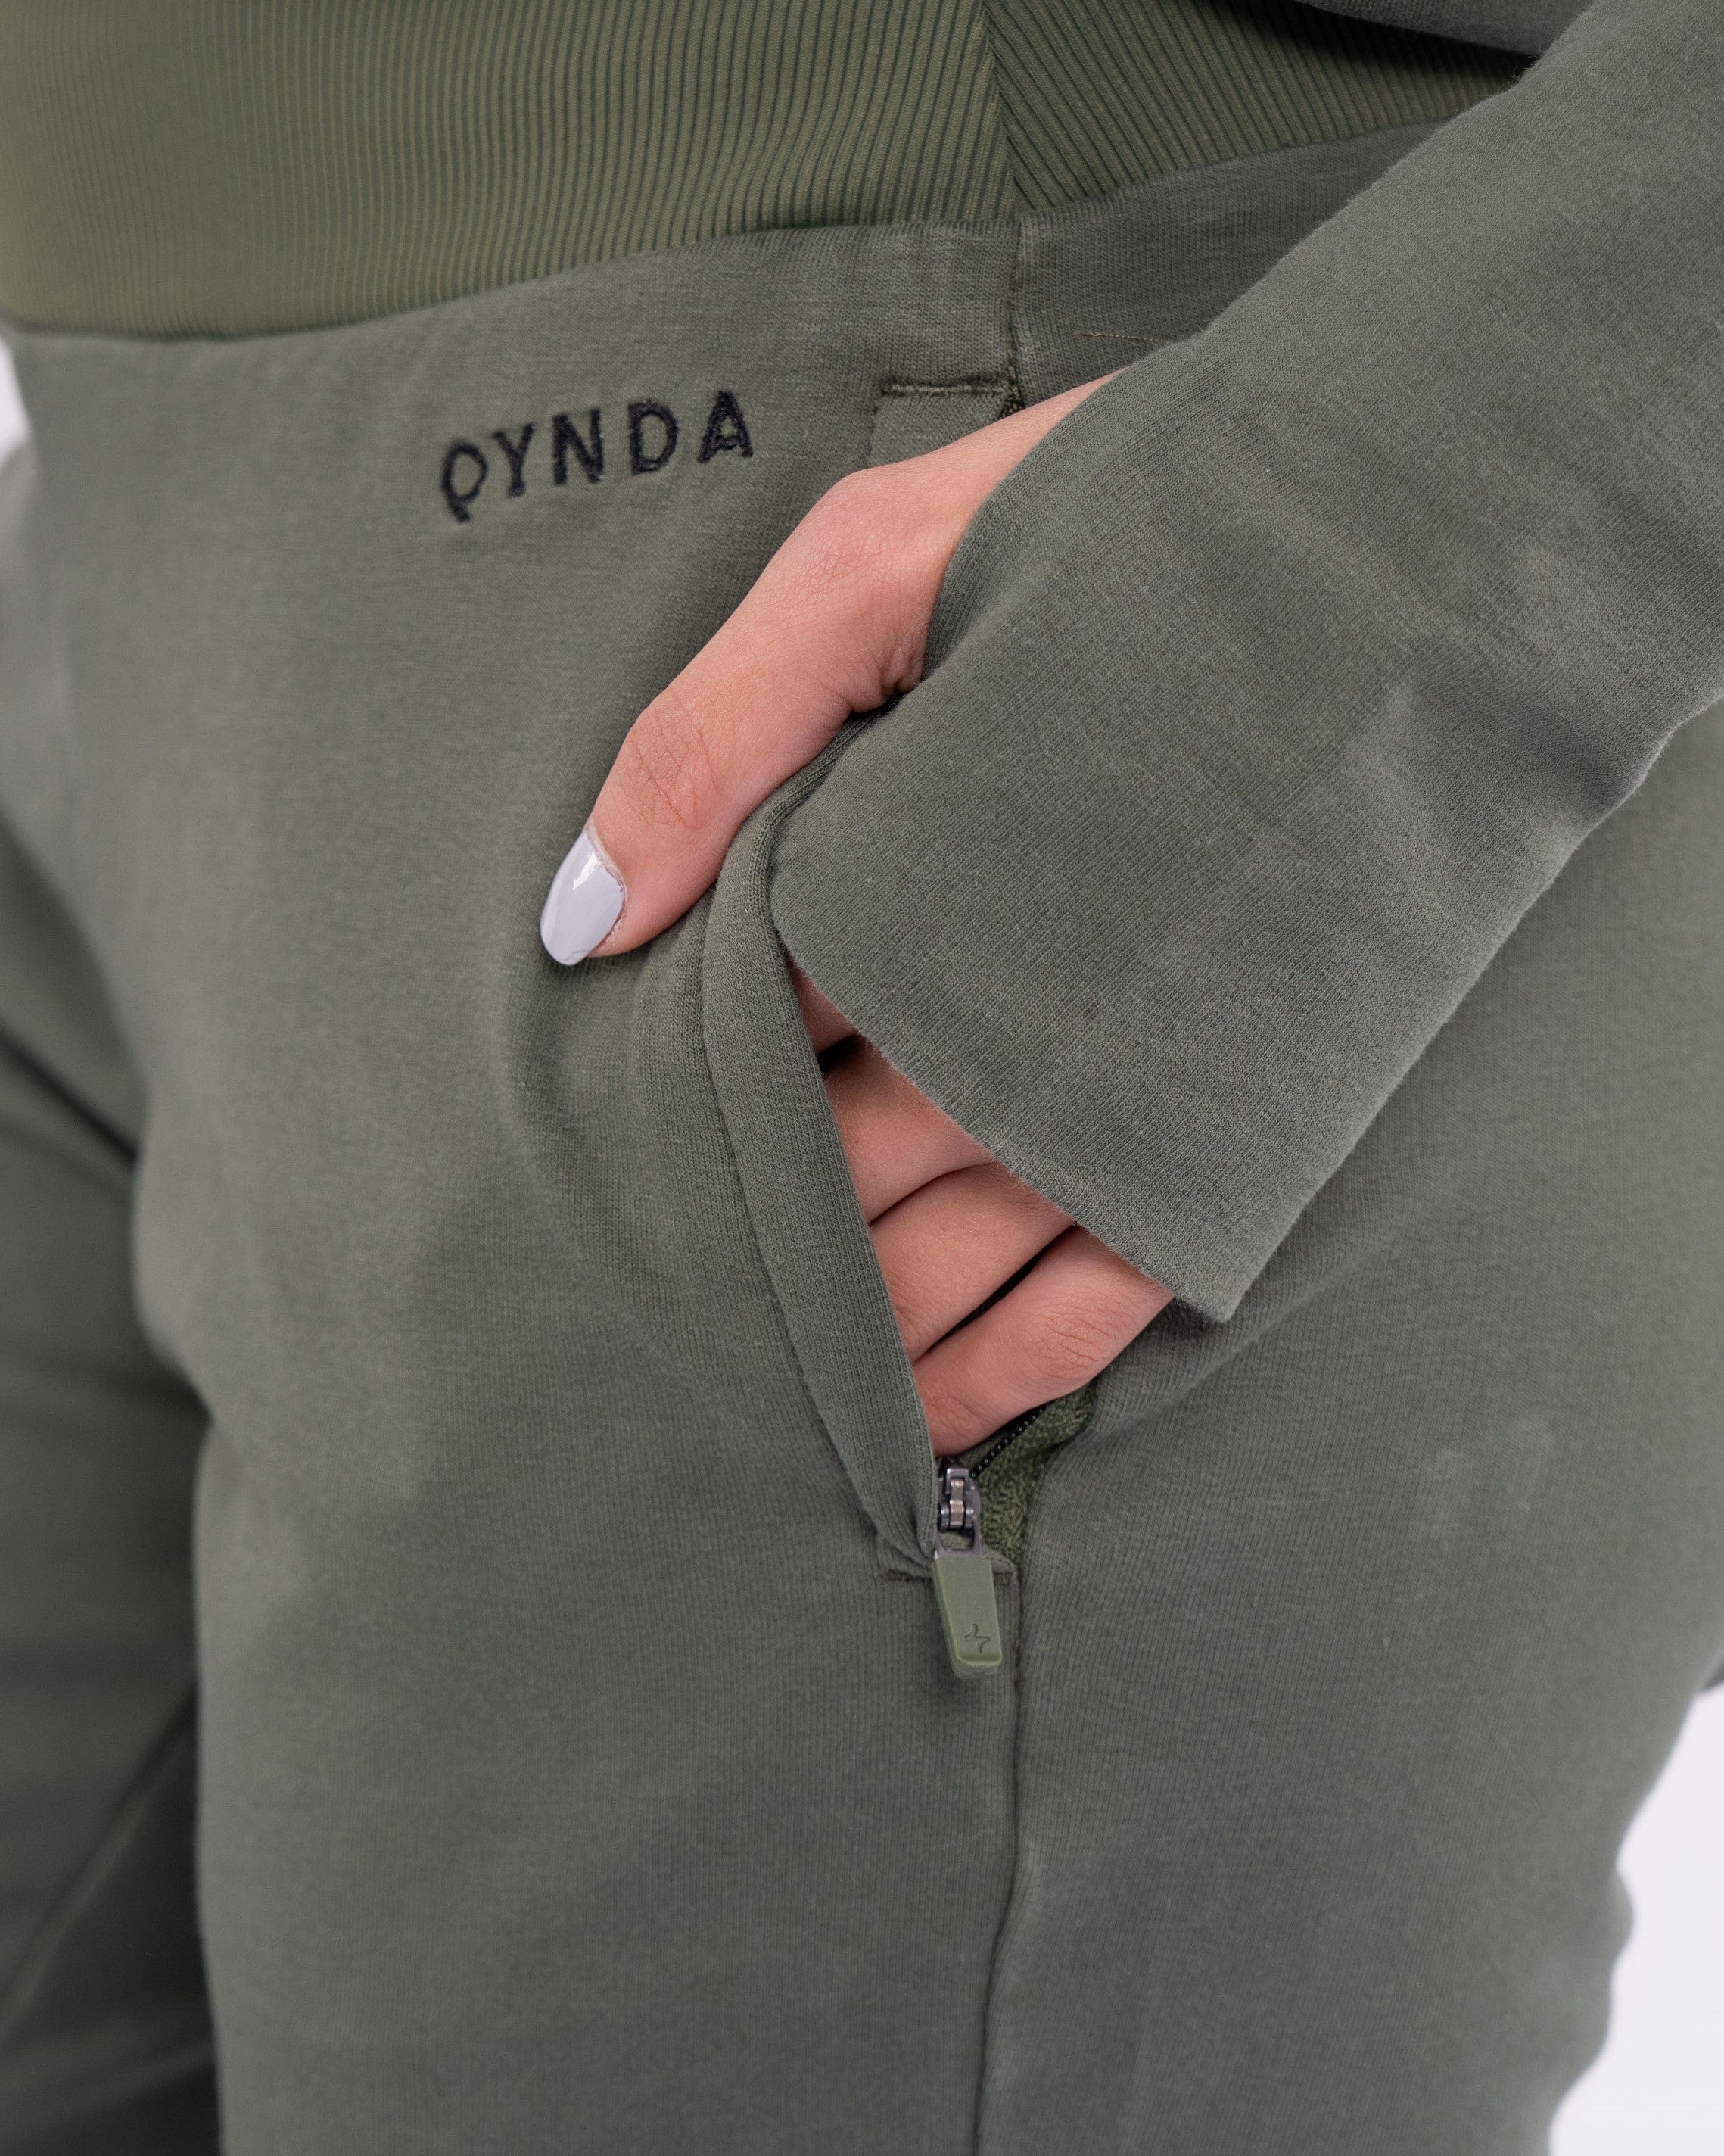 A close-up of a woman in an Olive color CANTARA PANTS with their hand in the pocket, showcasing a modern and minimalist fashion style by qynda.